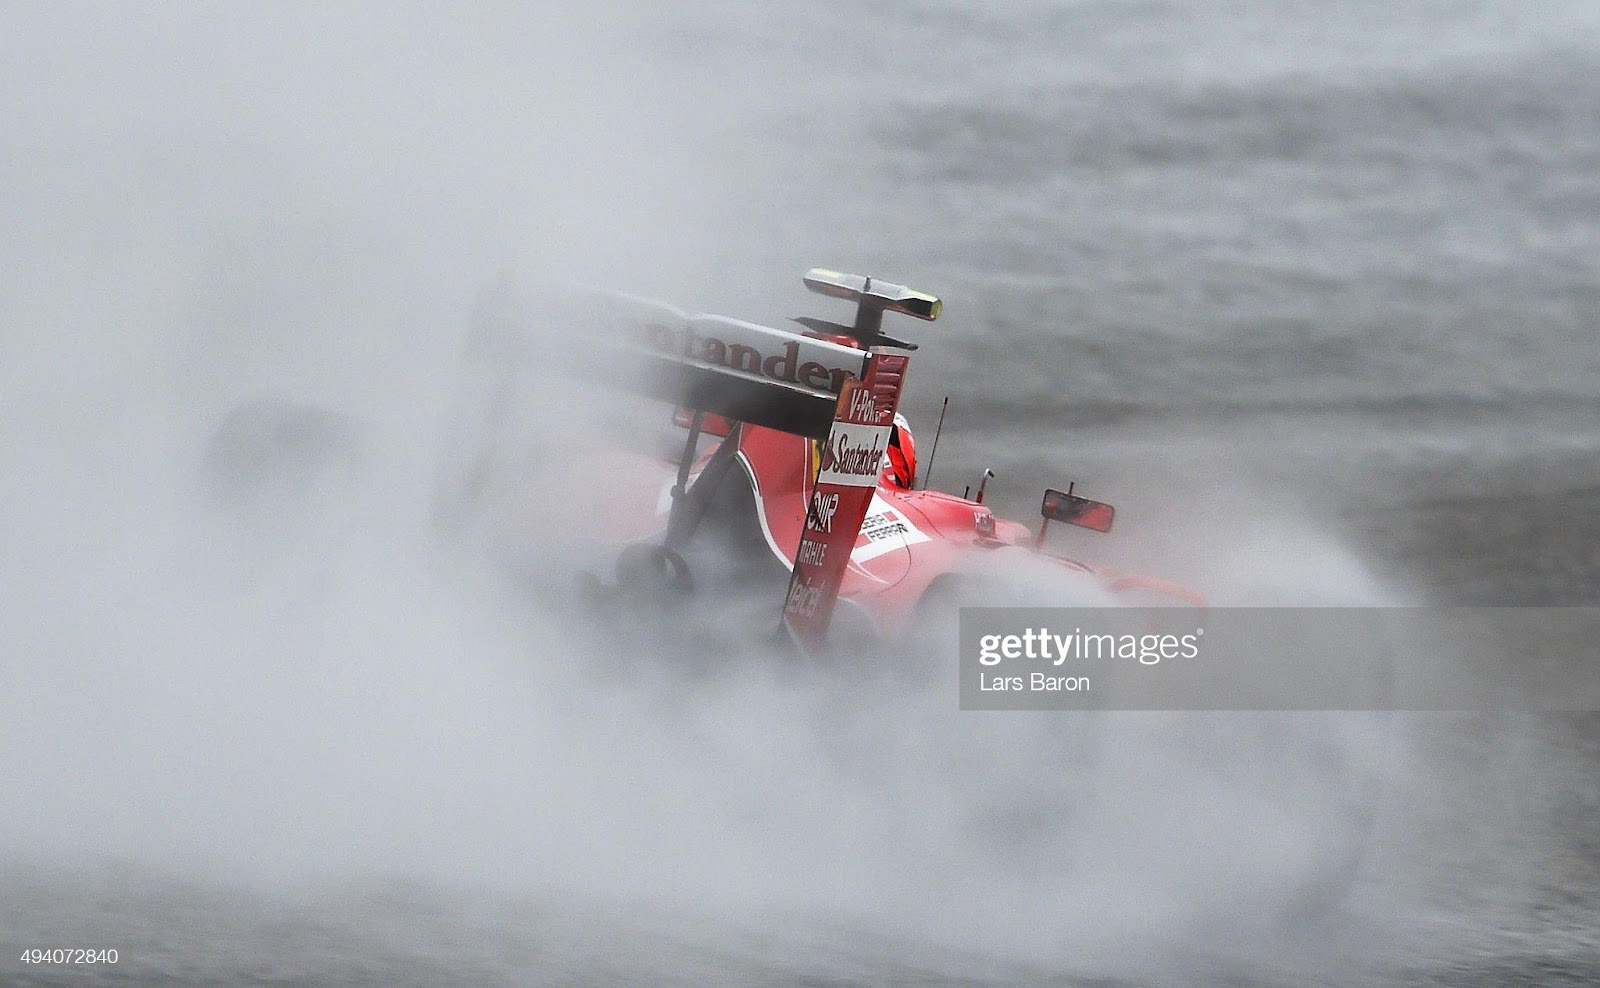 Kimi Raikkonen, Ferrari, drives during final practice for the United States F1 Grand Prix at Circuit of The Americas on October 24, 2015 in Austin, United States.